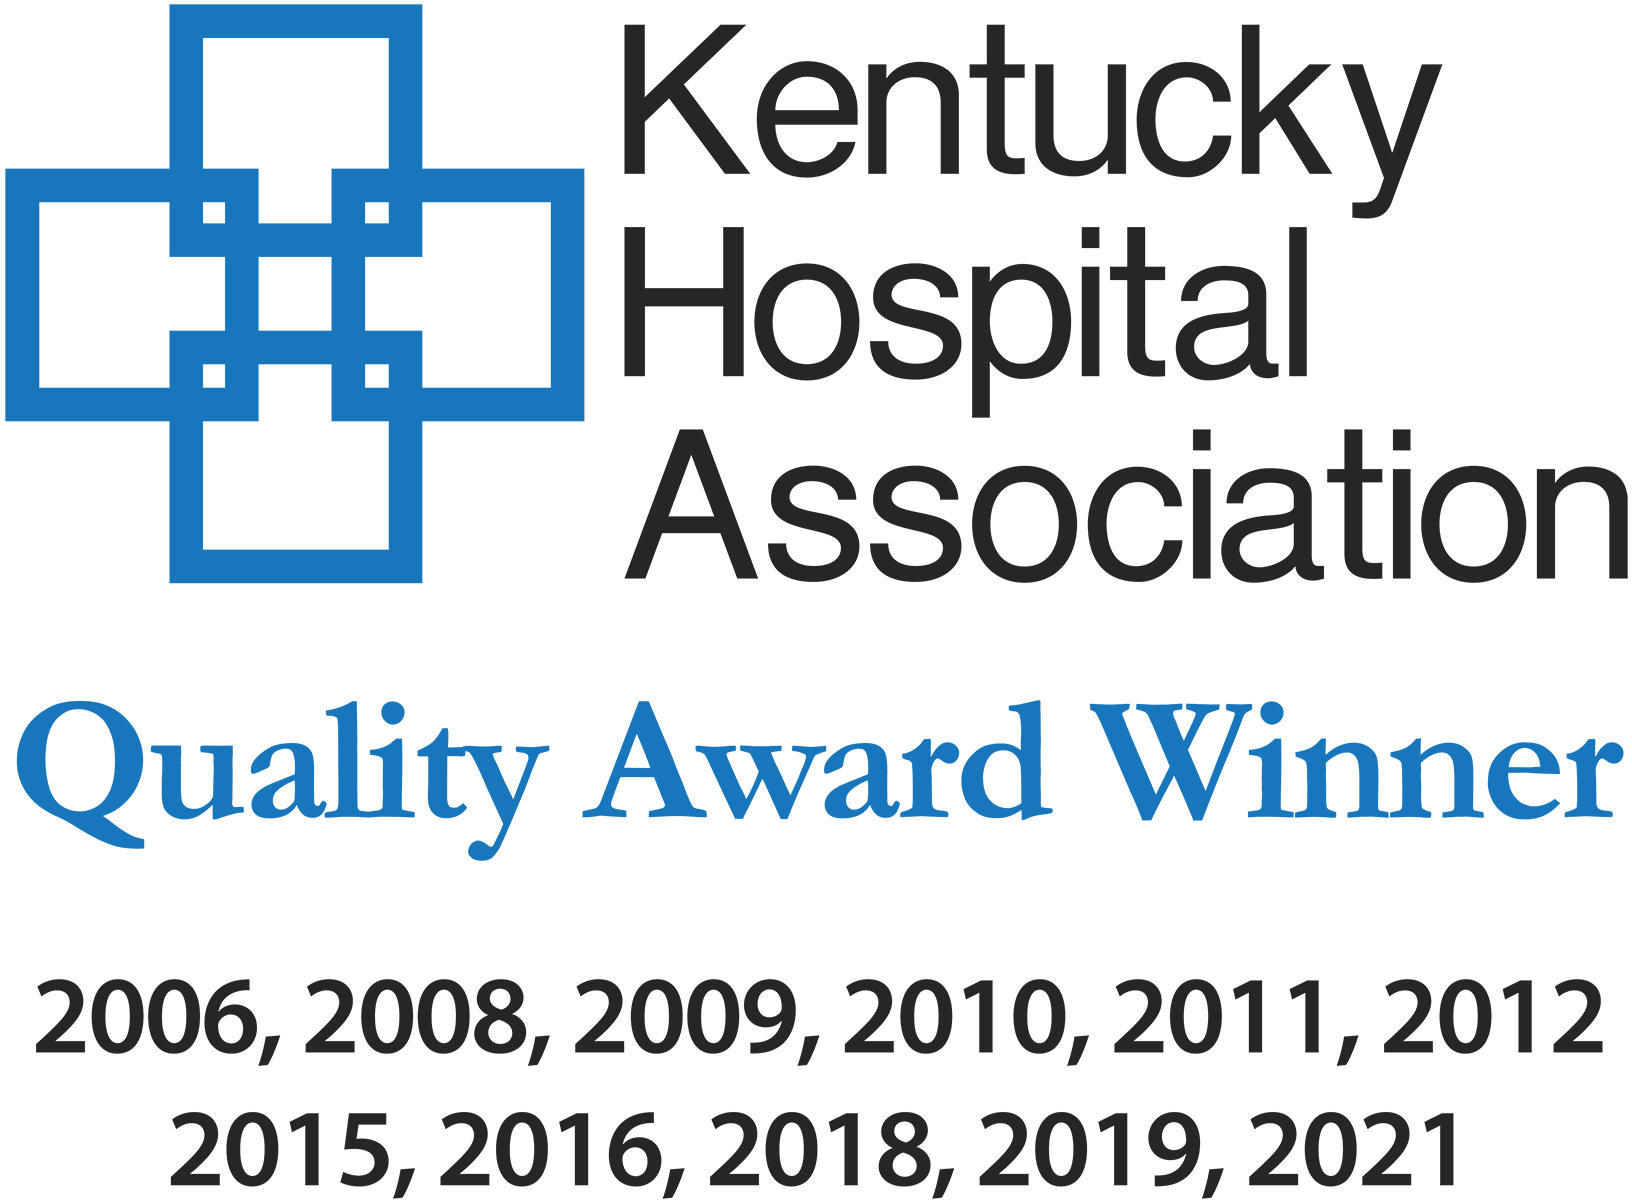 Rockcastle Regional Receives Quality Award for the Eleventh Time